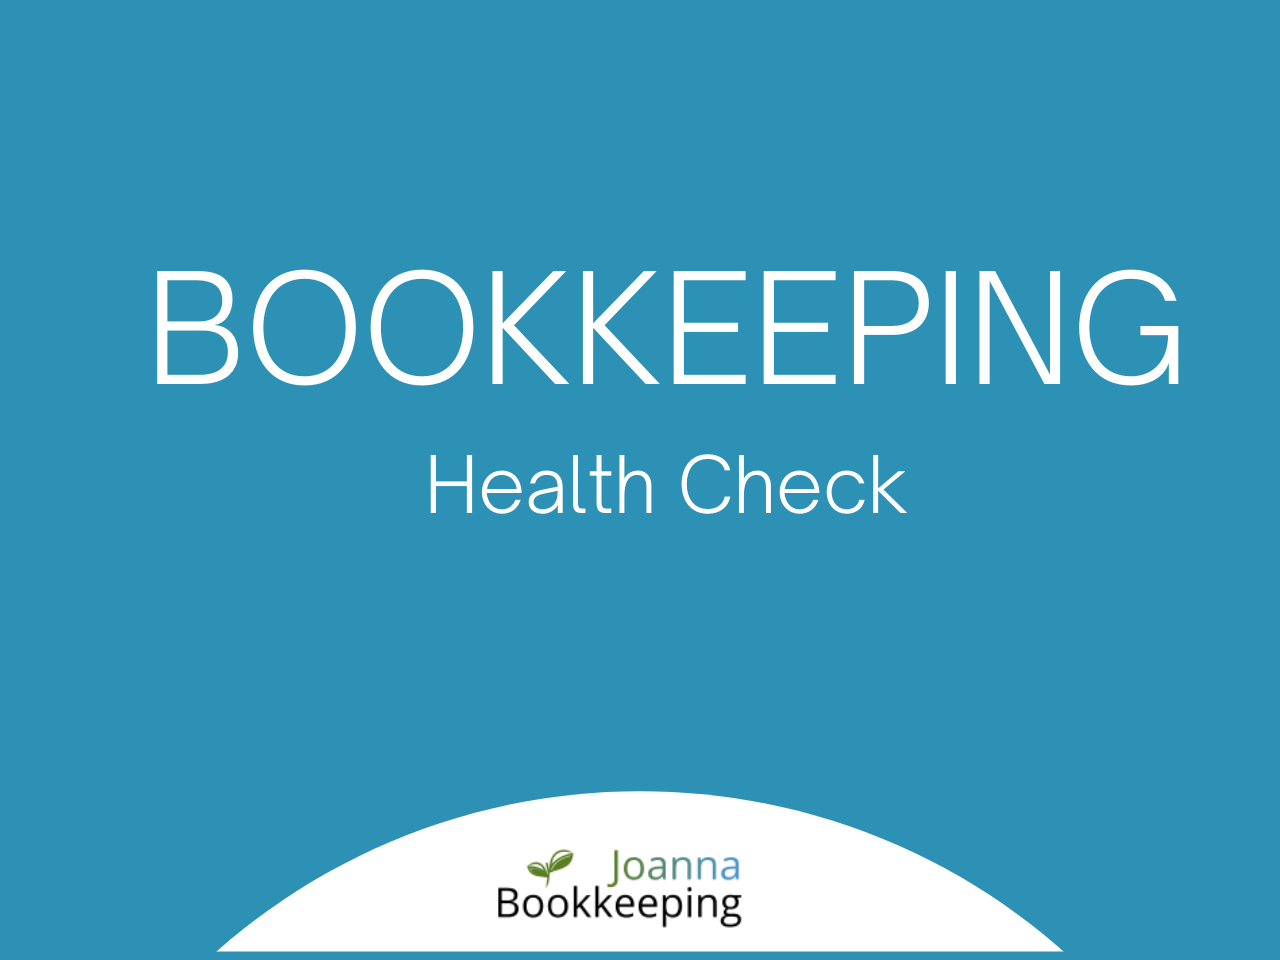 Oxford - Joanna Bookkeeping saves SMEs from consequences of poor bookkeeping by introducing a new Bookkeeping Health Check service